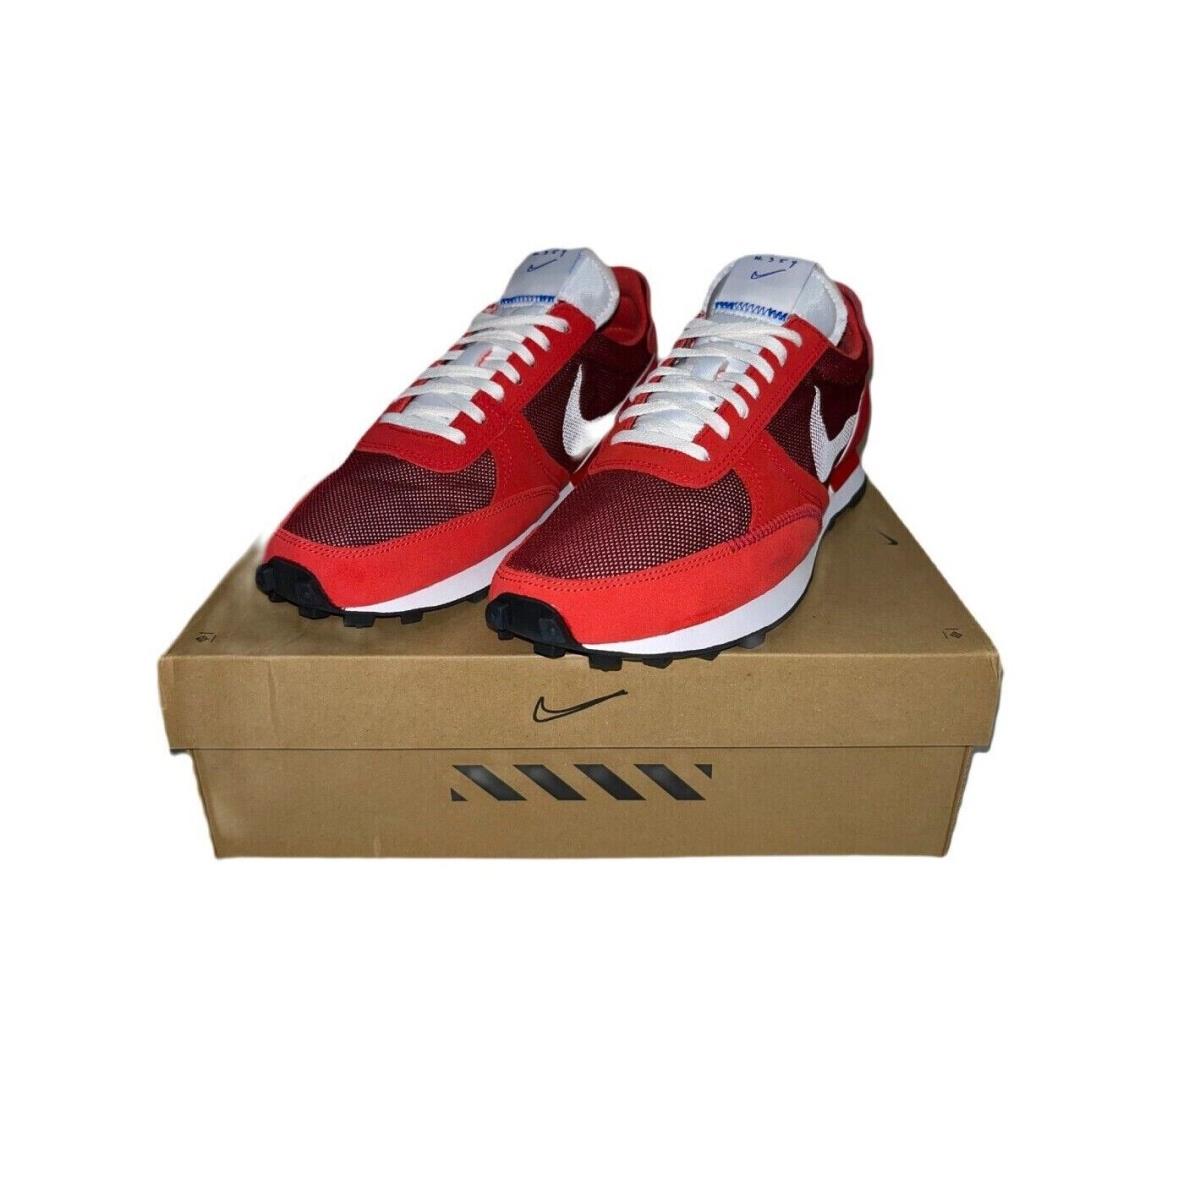 Nike Men`s Daybreak-type Casual/athletic Shoes - Team Red/University Red/White/Lobster